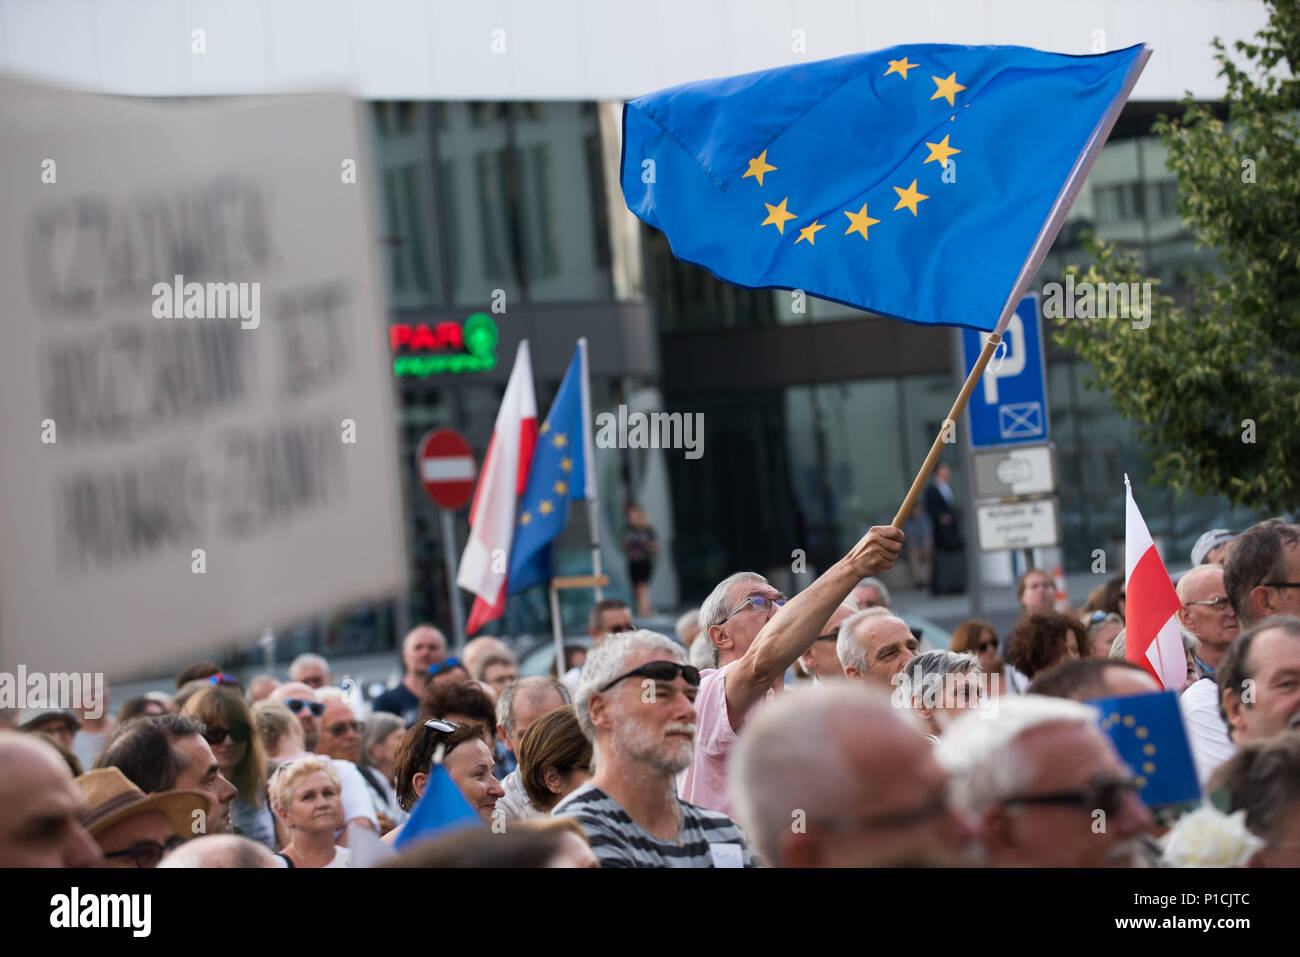 A man waves European Union Flag during a protest in favour of  European Commission move urging EU leaders to press forward with disciplinary action against Poland for allegedly violating rule-of-law standards in front of the Courts in Krakow. In December, the European Commission launched an Article 7 disciplinary process, which, in theory, could lead to the suspension of Poland’s EU voting right. The European Commission  gave Poland until late June to reverse the reforms introduced by the current government but no changes were made until today. The protests are organized by KOD ( Committee for Stock Photo